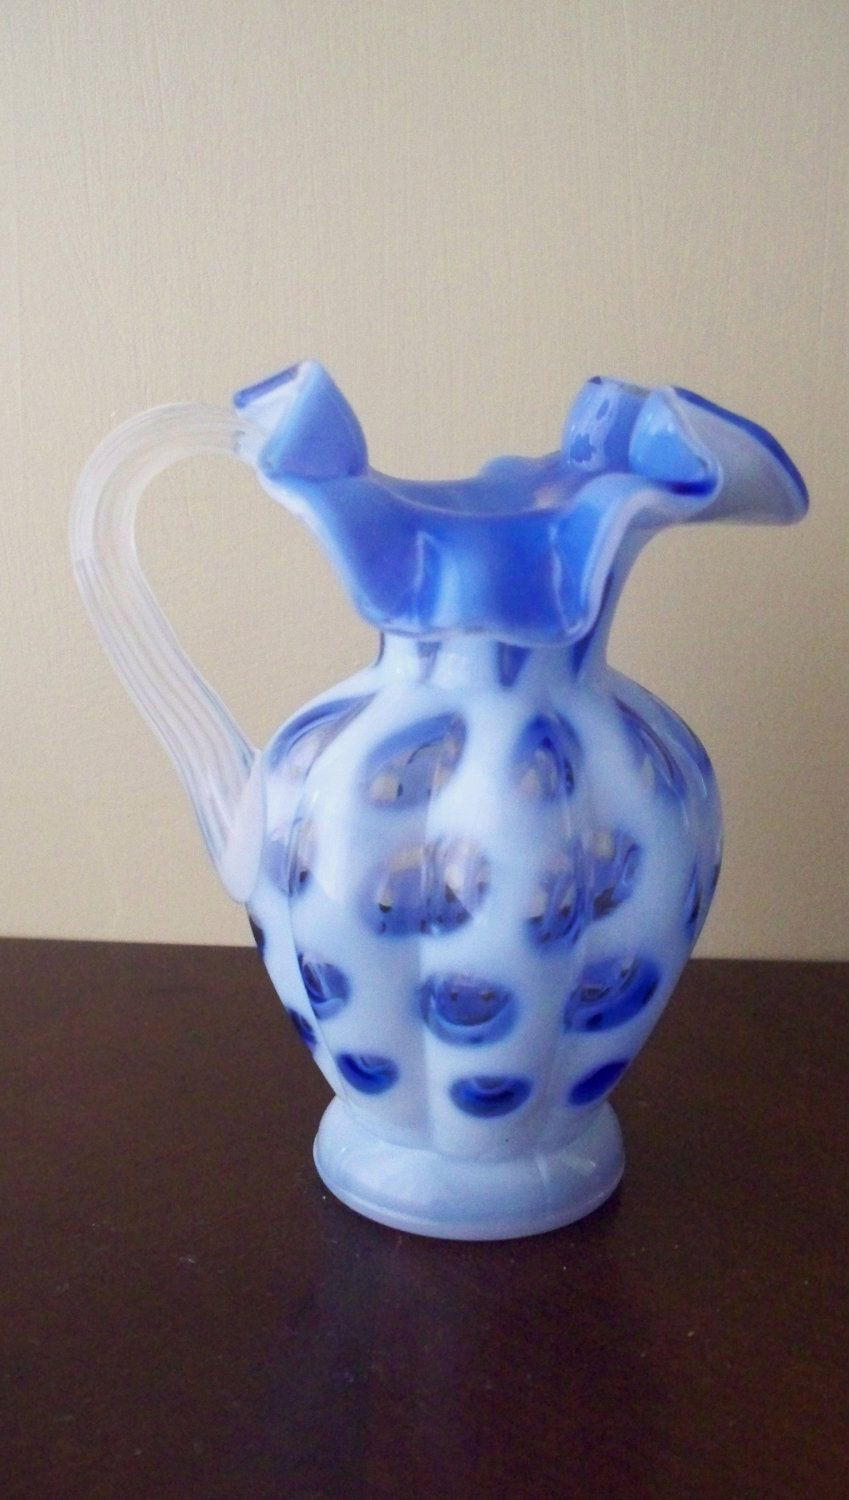 26 Lovely White Milk Jug Vase 2024 free download white milk jug vase of fenton art glass blue coin dot handled pitcher ruffled crimped top pertaining to fenton art glass blue coin dot handled pitcher ruffled crimped top signed mint